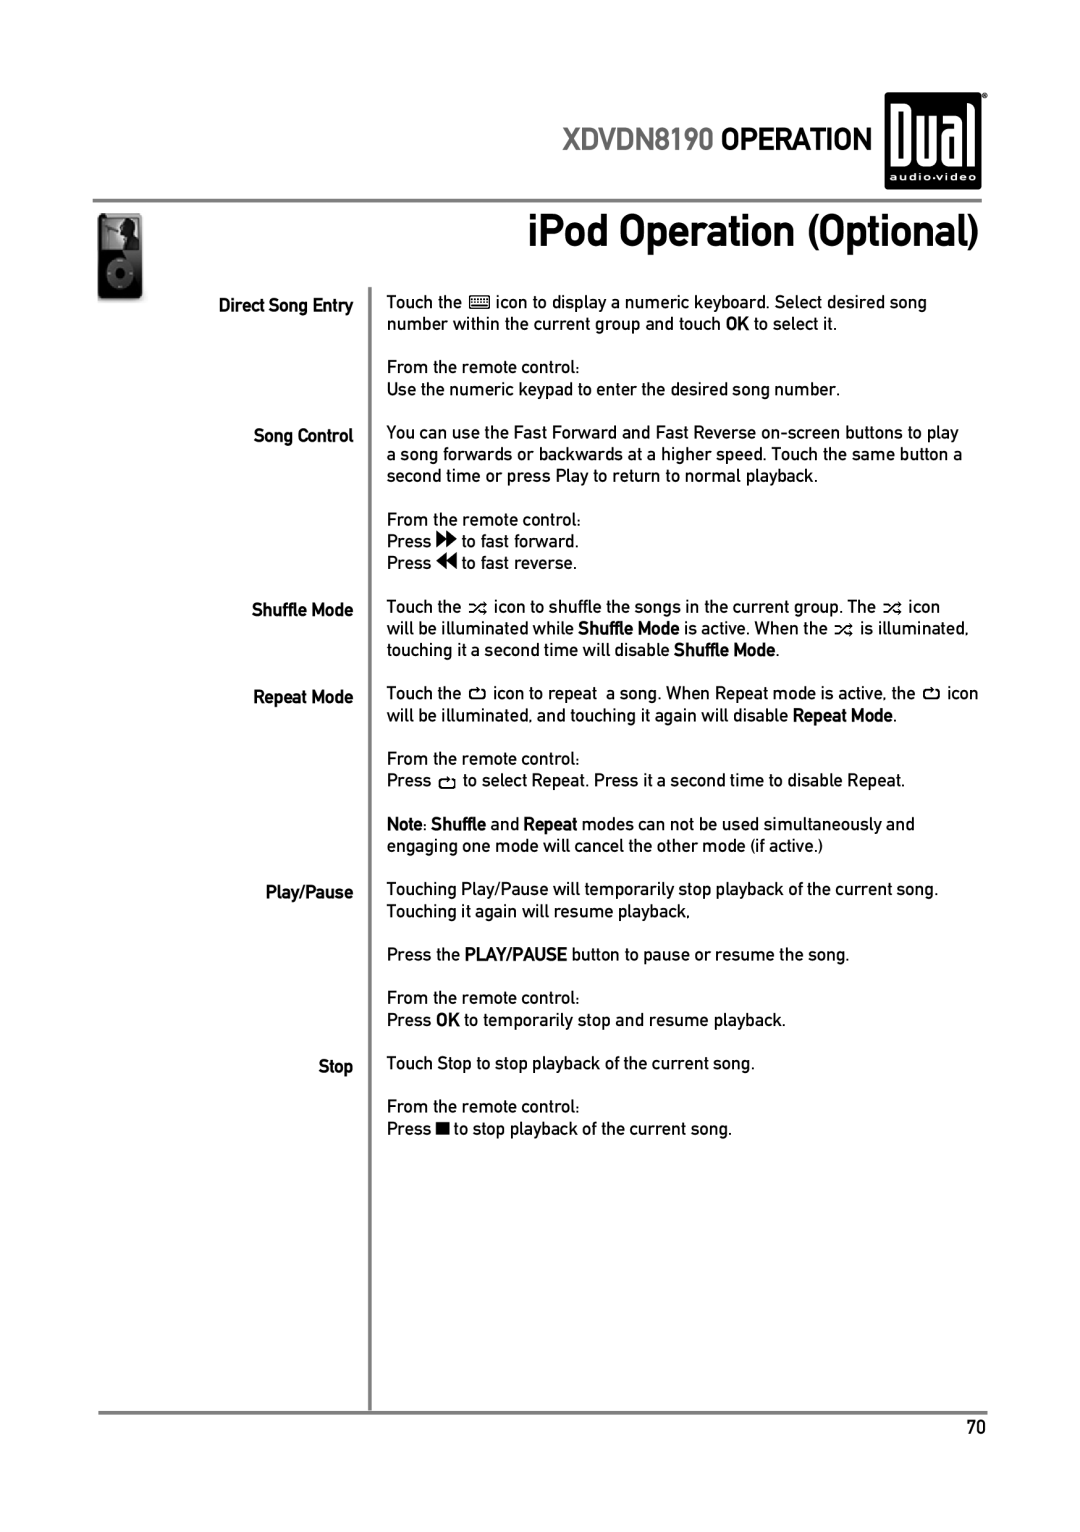 Dual owner manual iPod Operation Optional, XDVDN8190 OPERATION, Direct Song Entry Song Control Shuffle Mode 